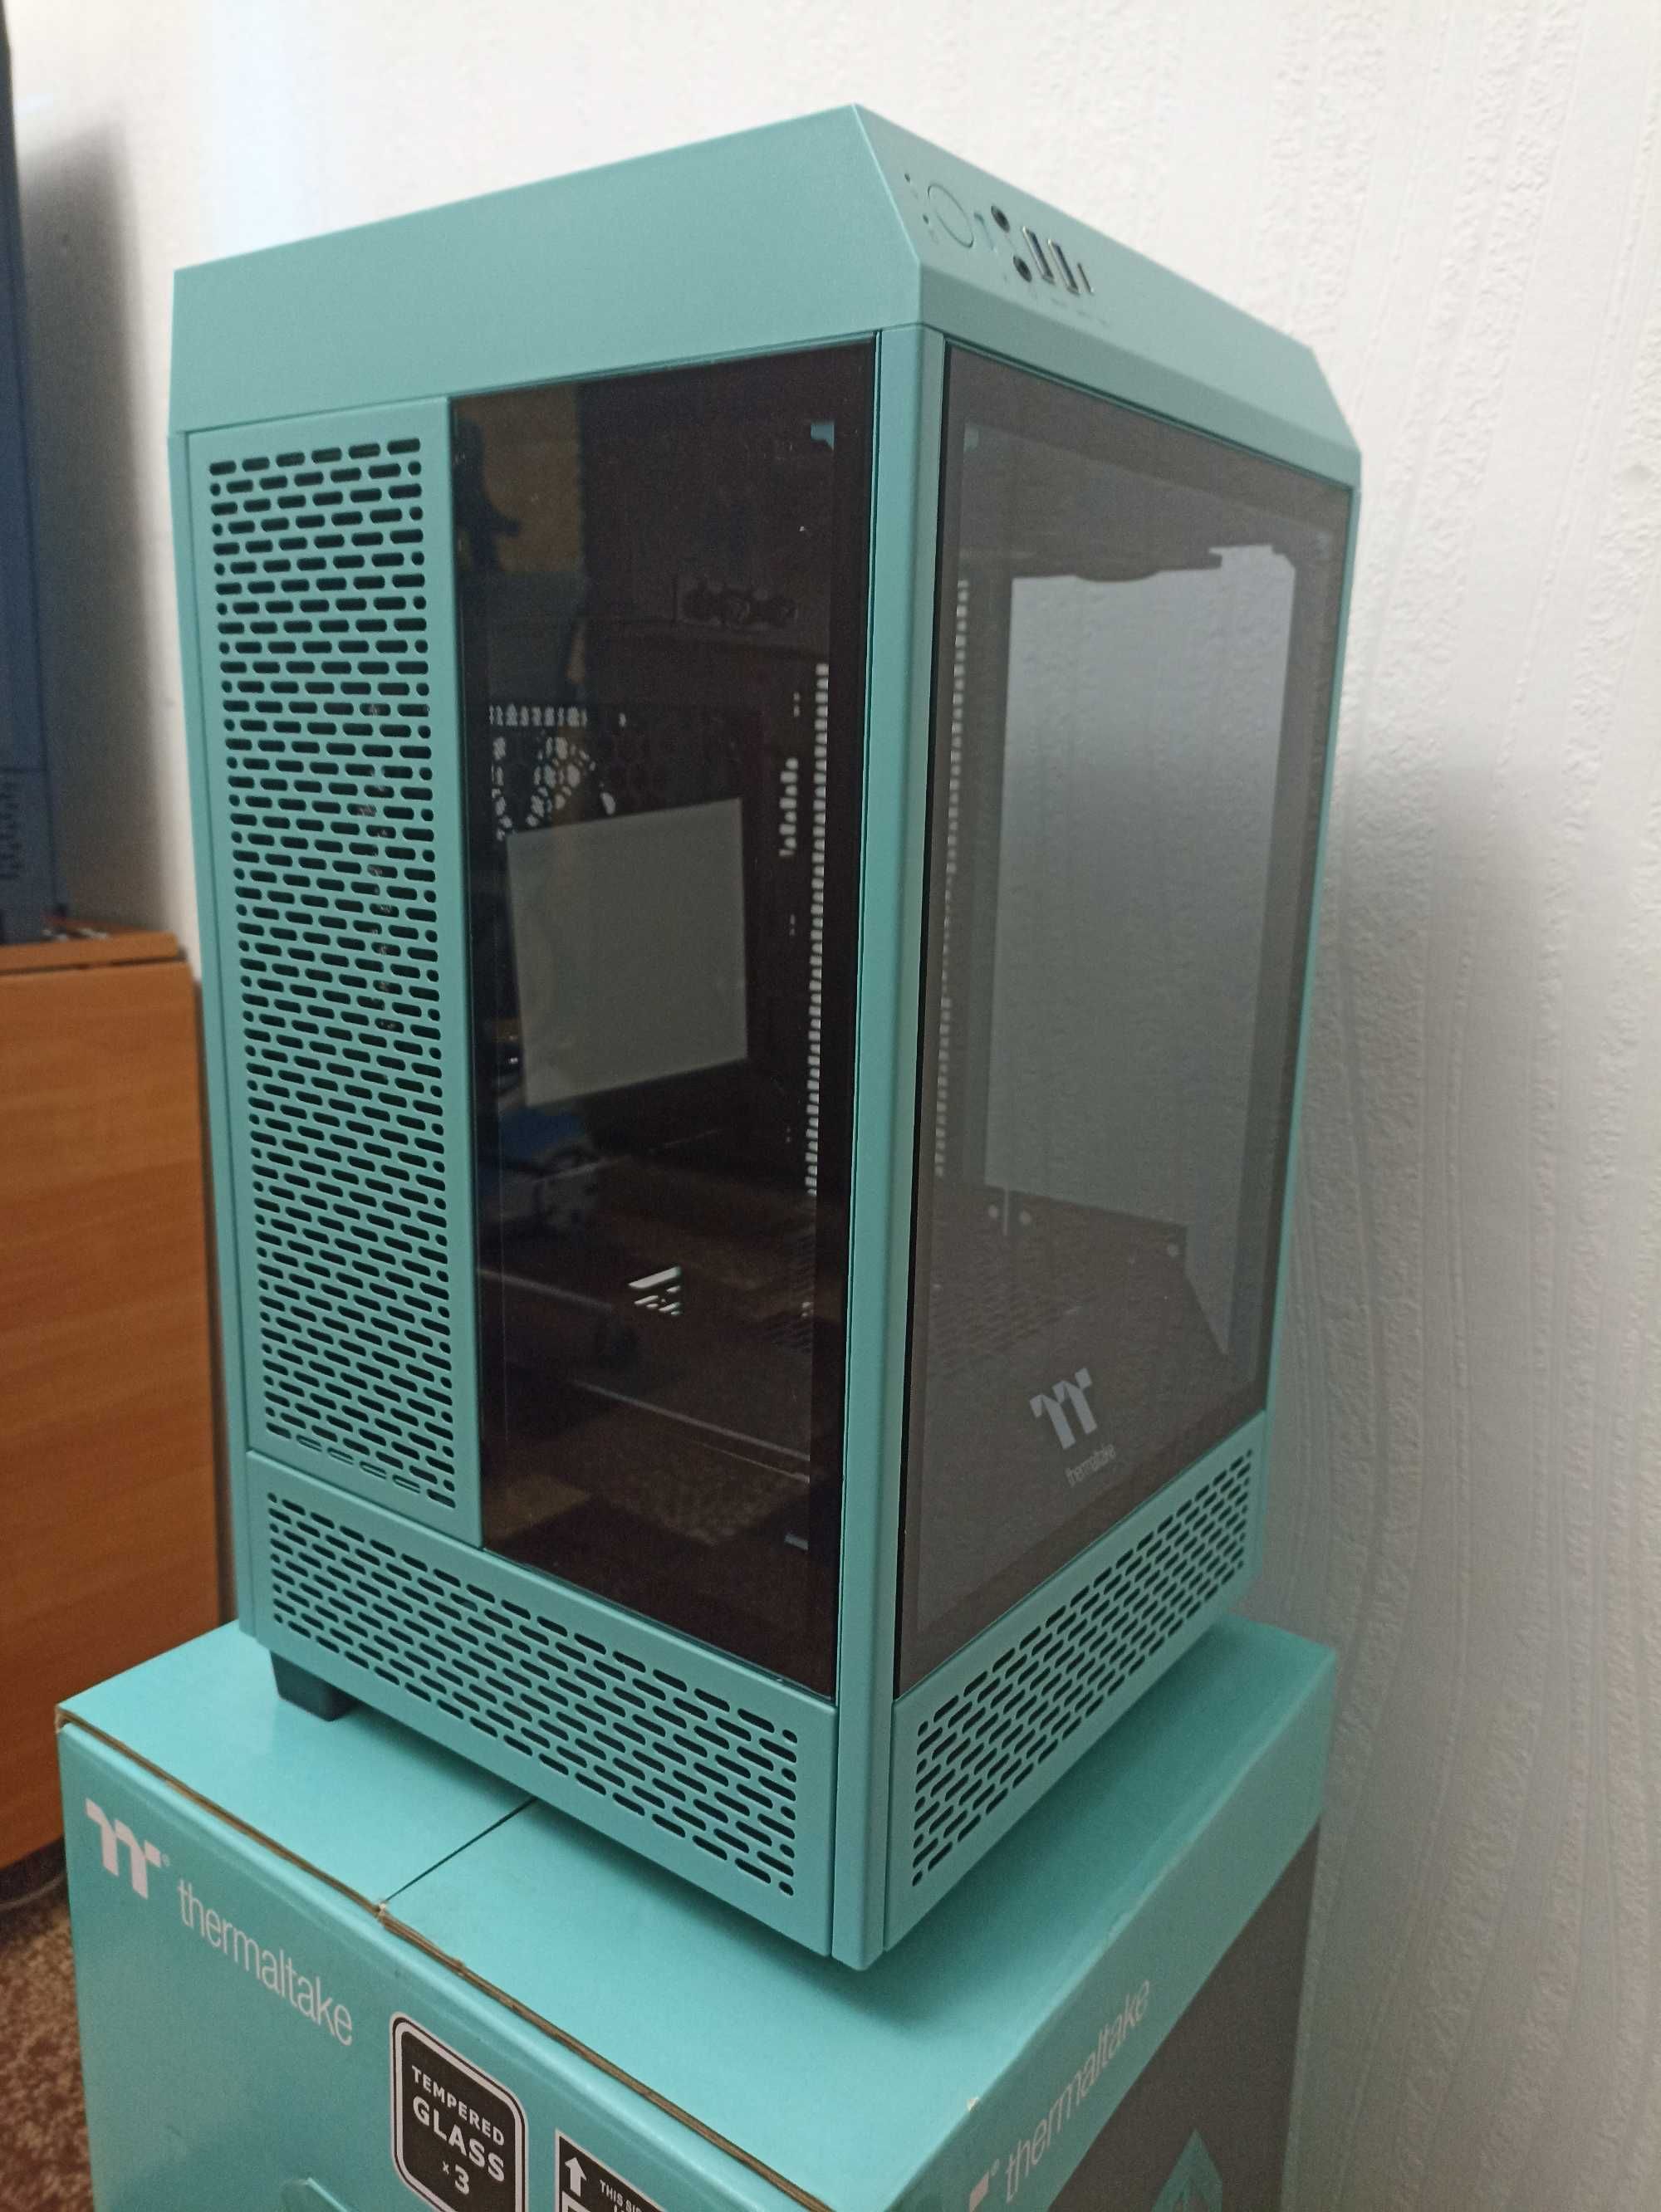 The Tower 100 Turquoise Mini Chassis